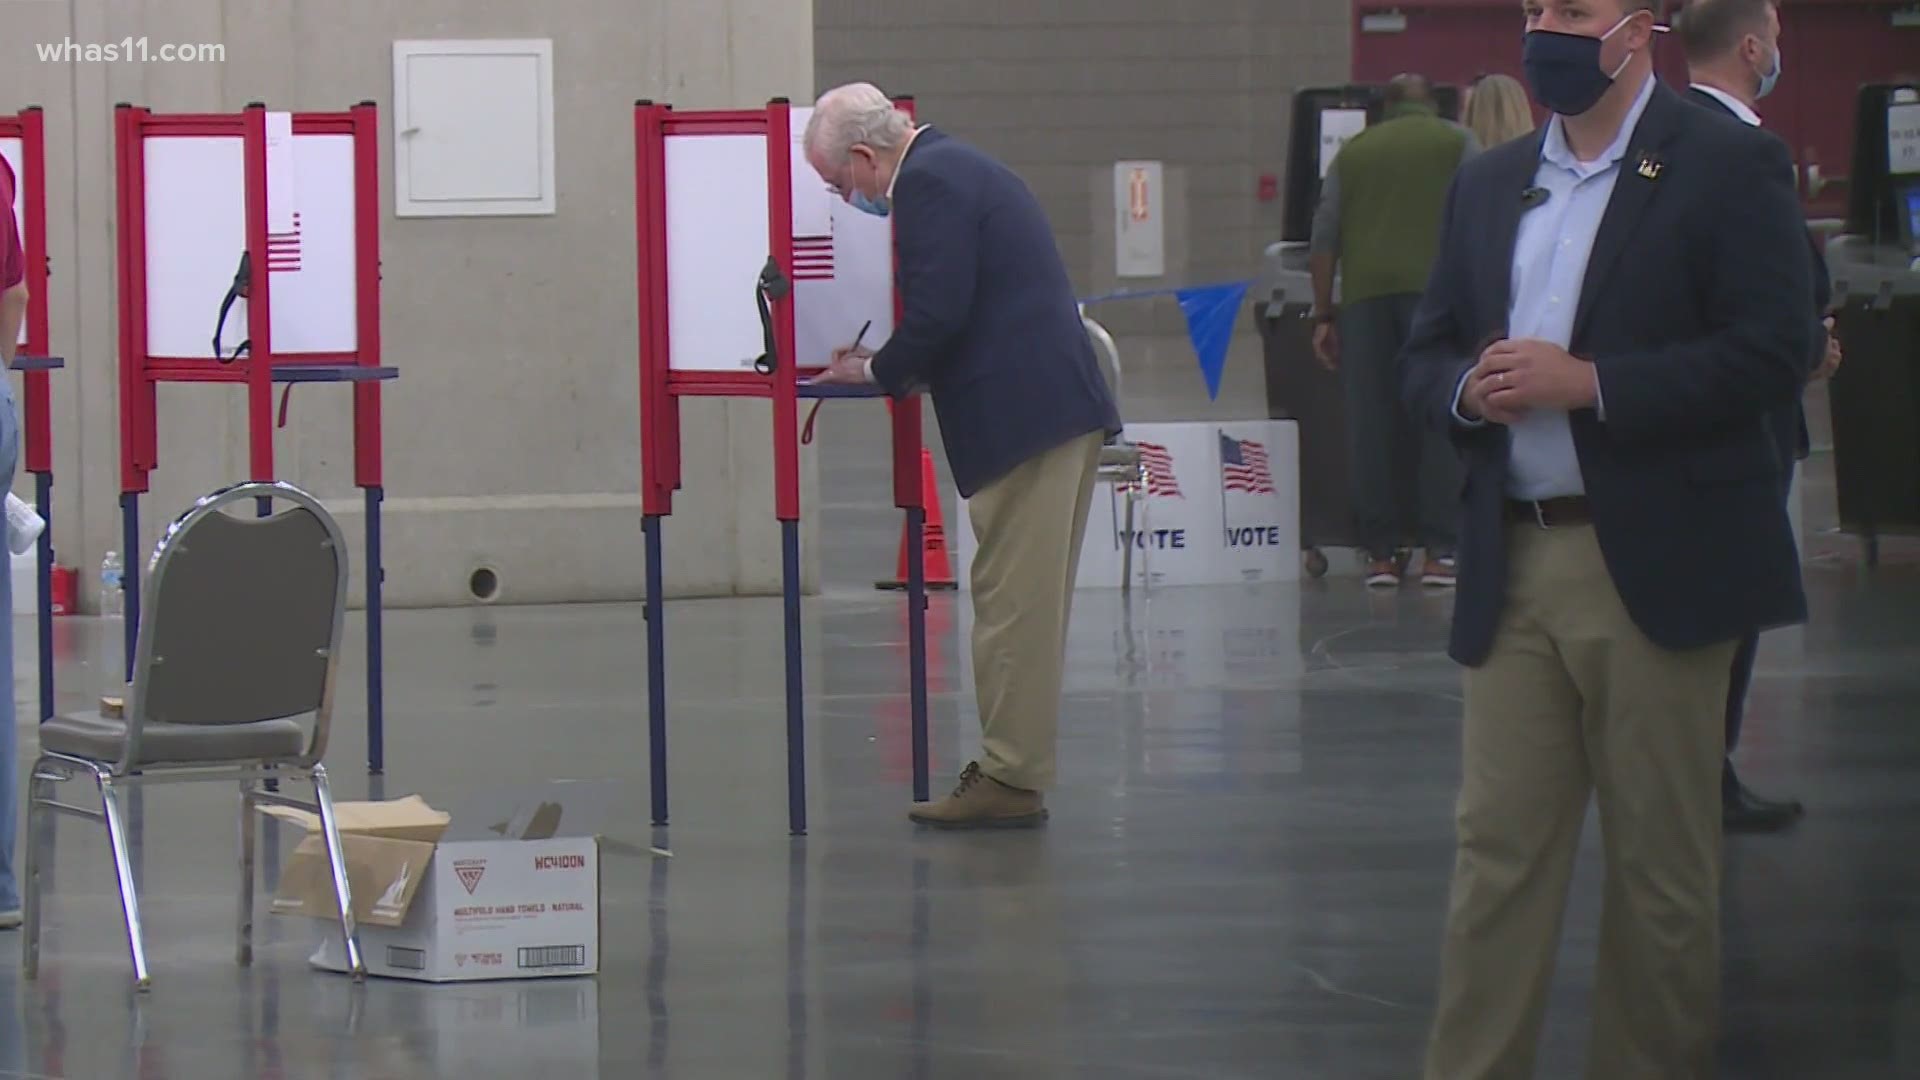 Sen. Mitch McConnell was one of many Kentuckians who took advantage of early in-person voting.